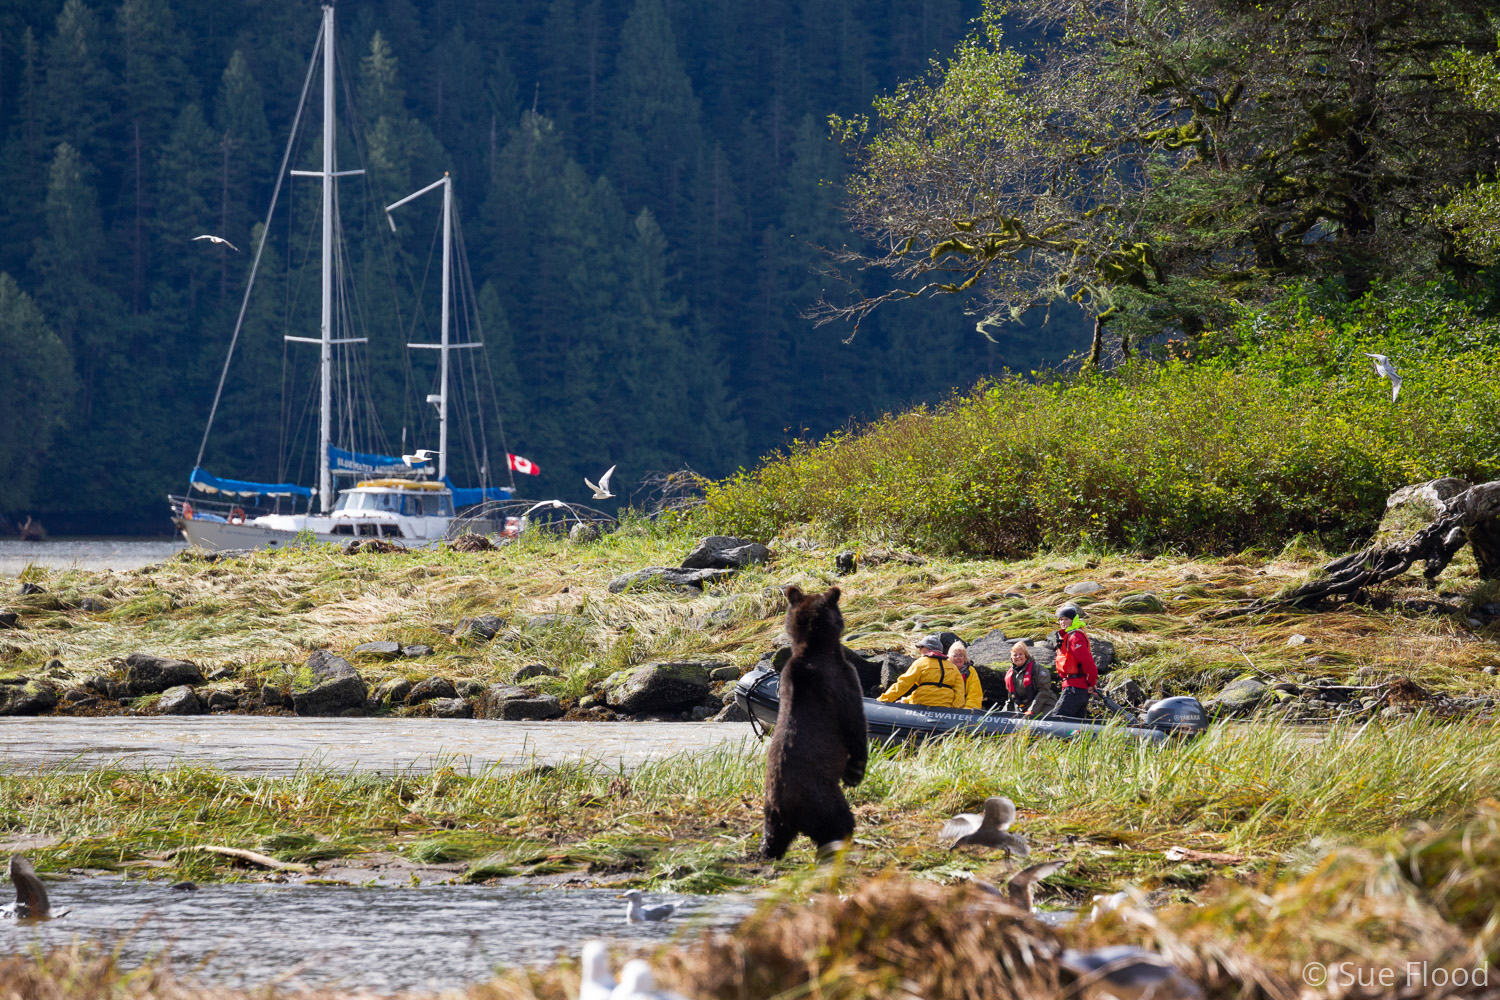 Young bear stands up to watch guests in zodiac, Great Bear Rainforest, British Columbia, Canada.